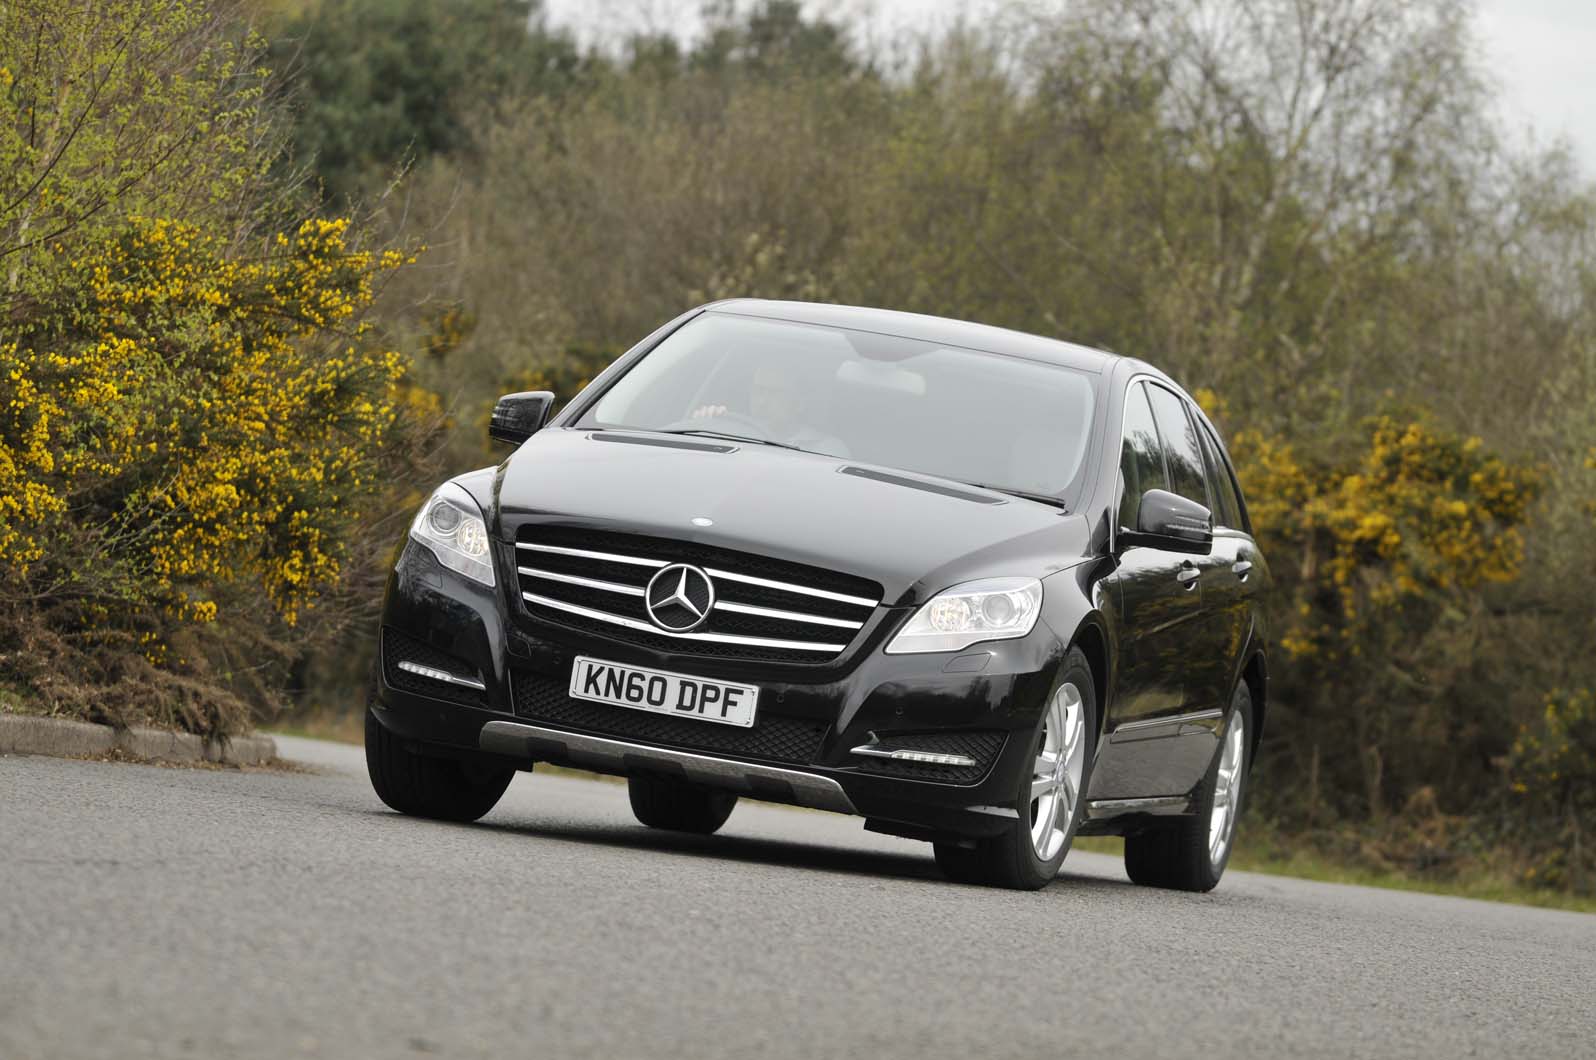 Used car buying guide: Mercedes-Benz R-Class